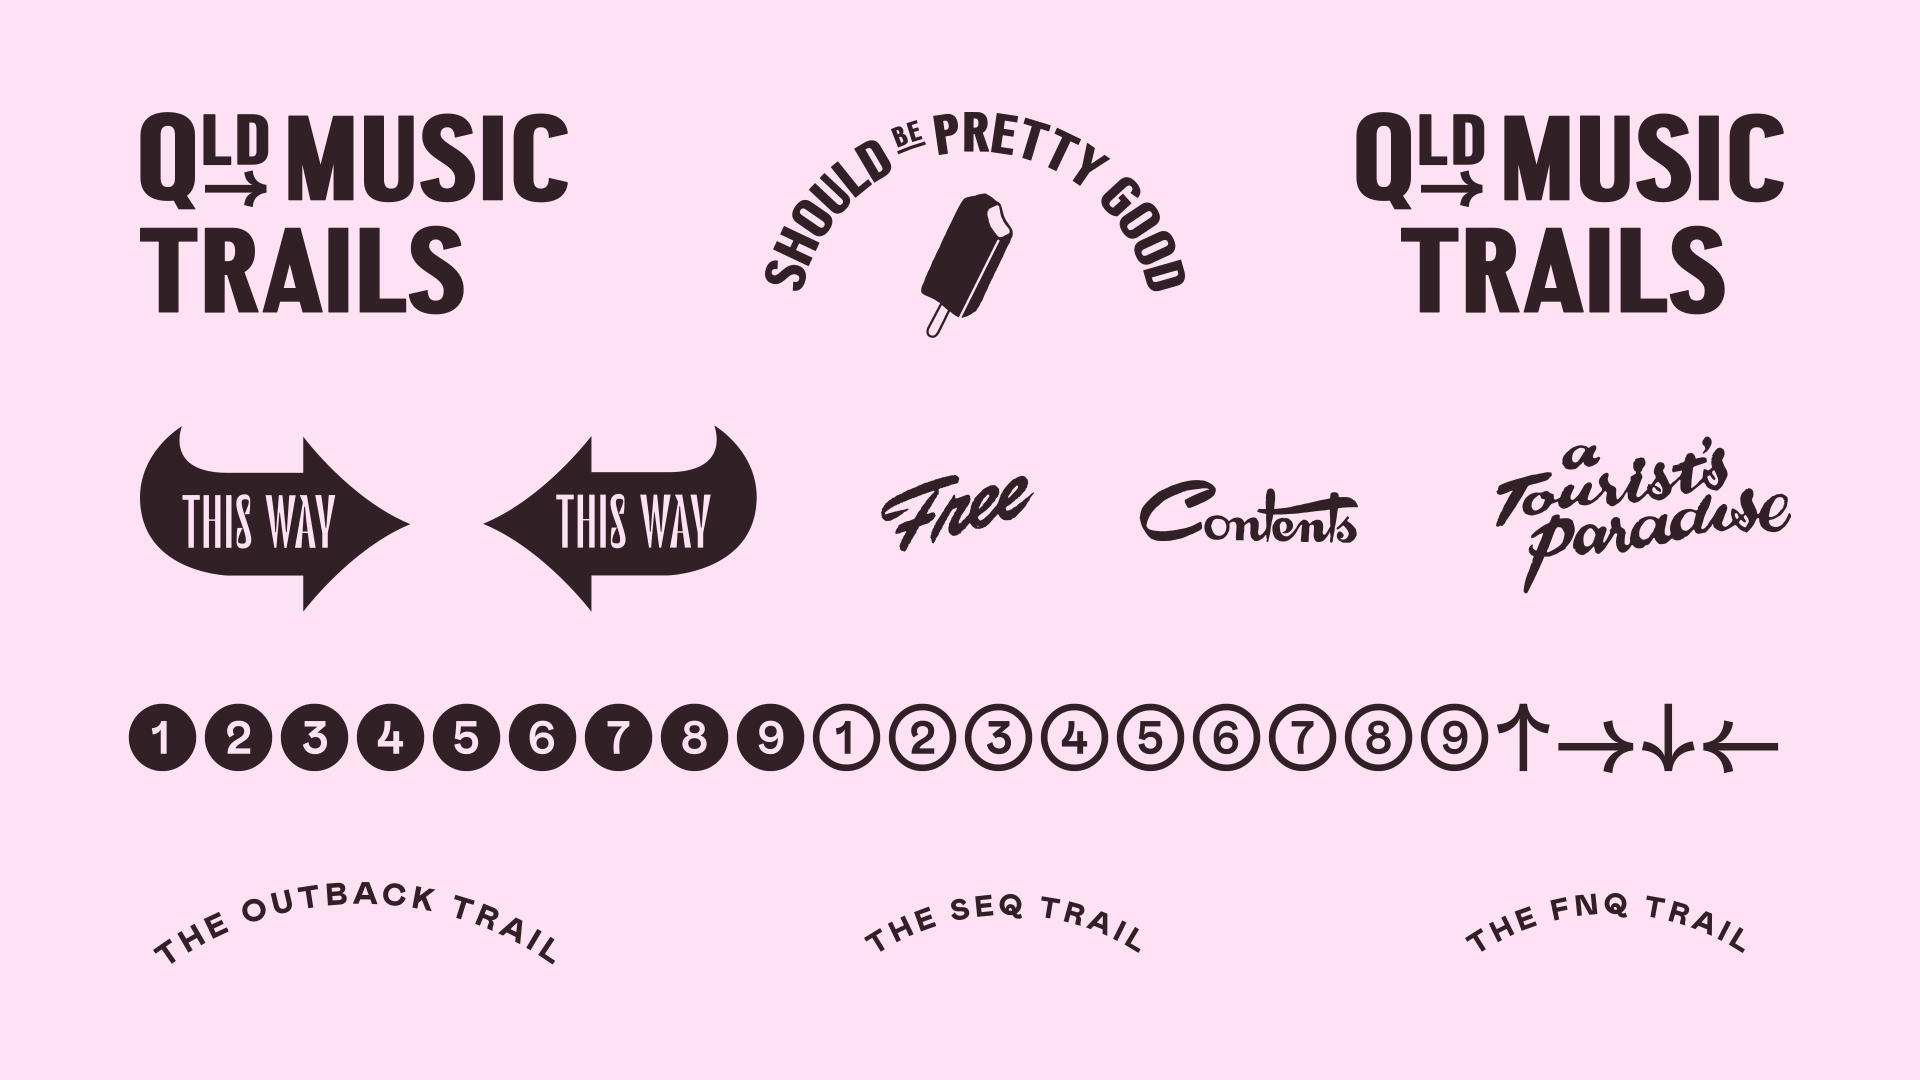 Trails brand elements including logos, tagline, typography and graphics